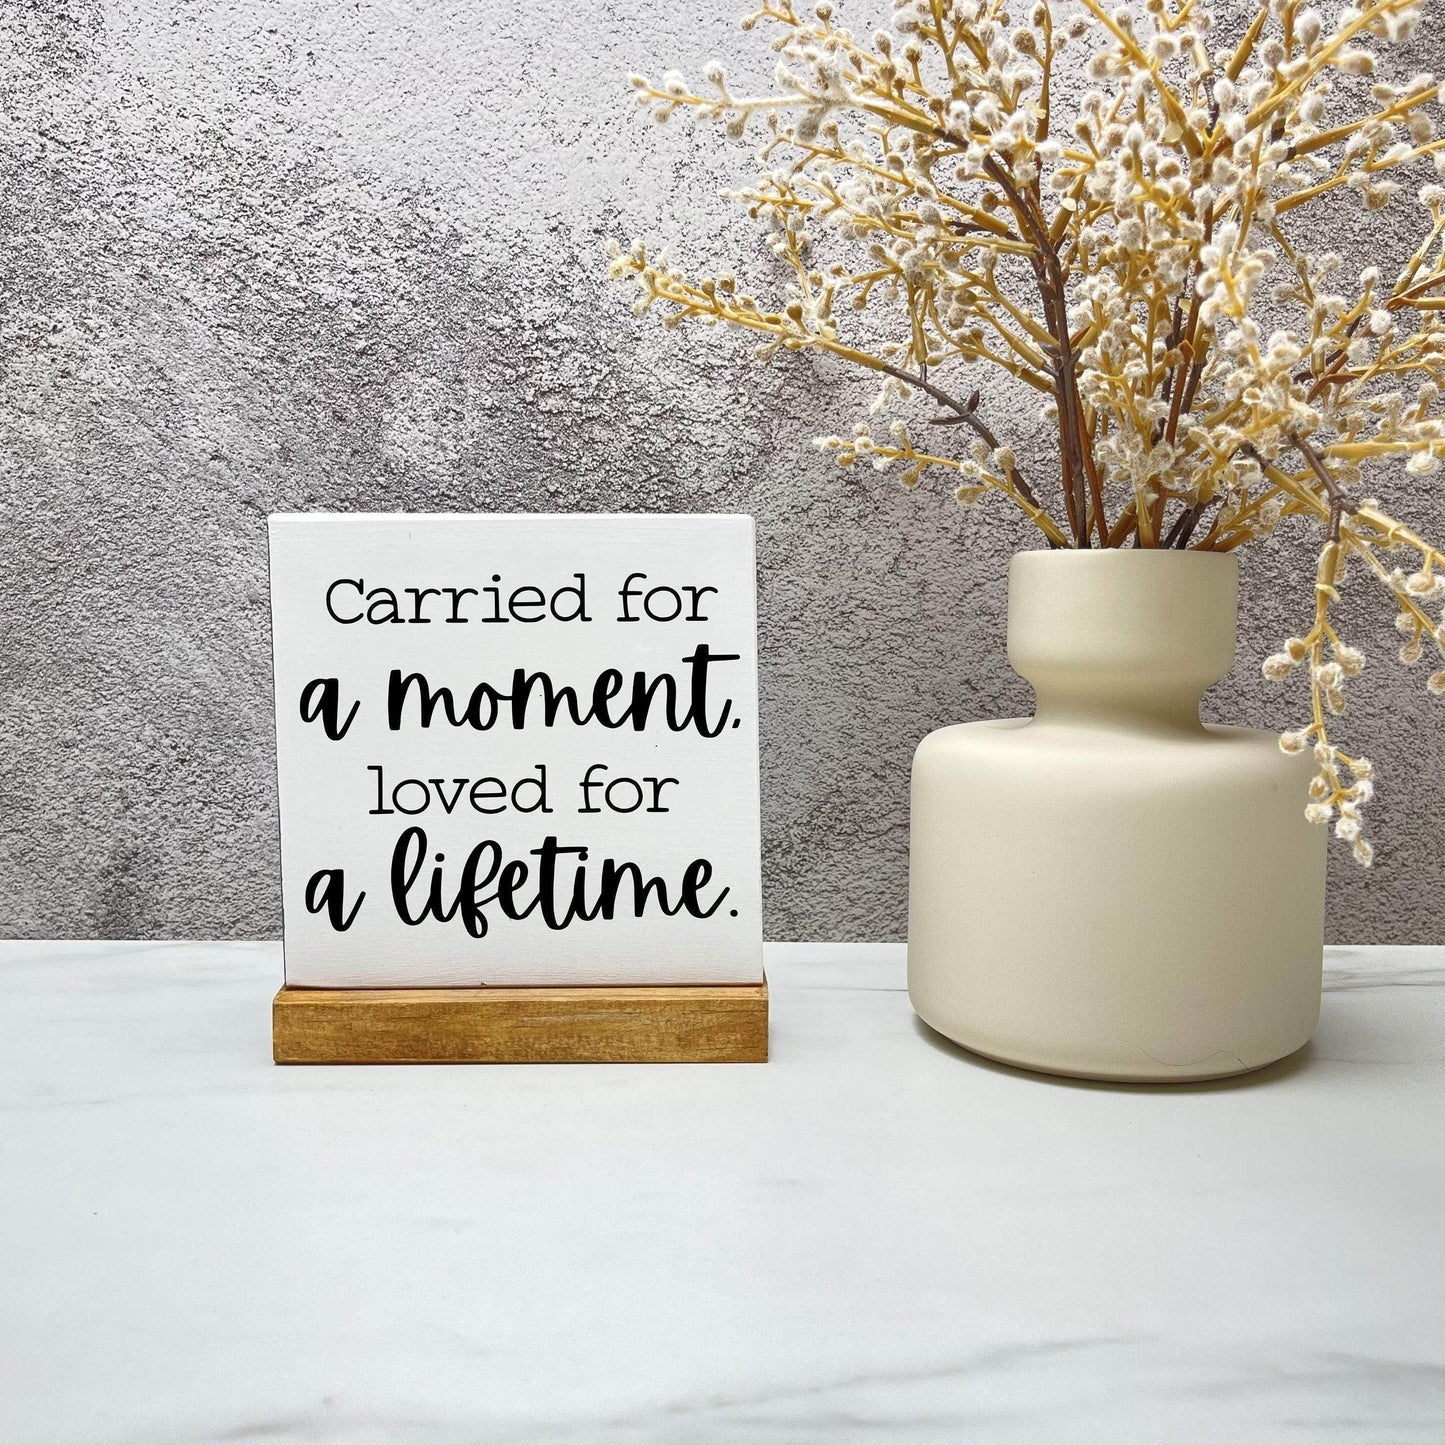 Carried for a moment, loved for a life time wood sign, farmhouse sign, rustic decor, home decor